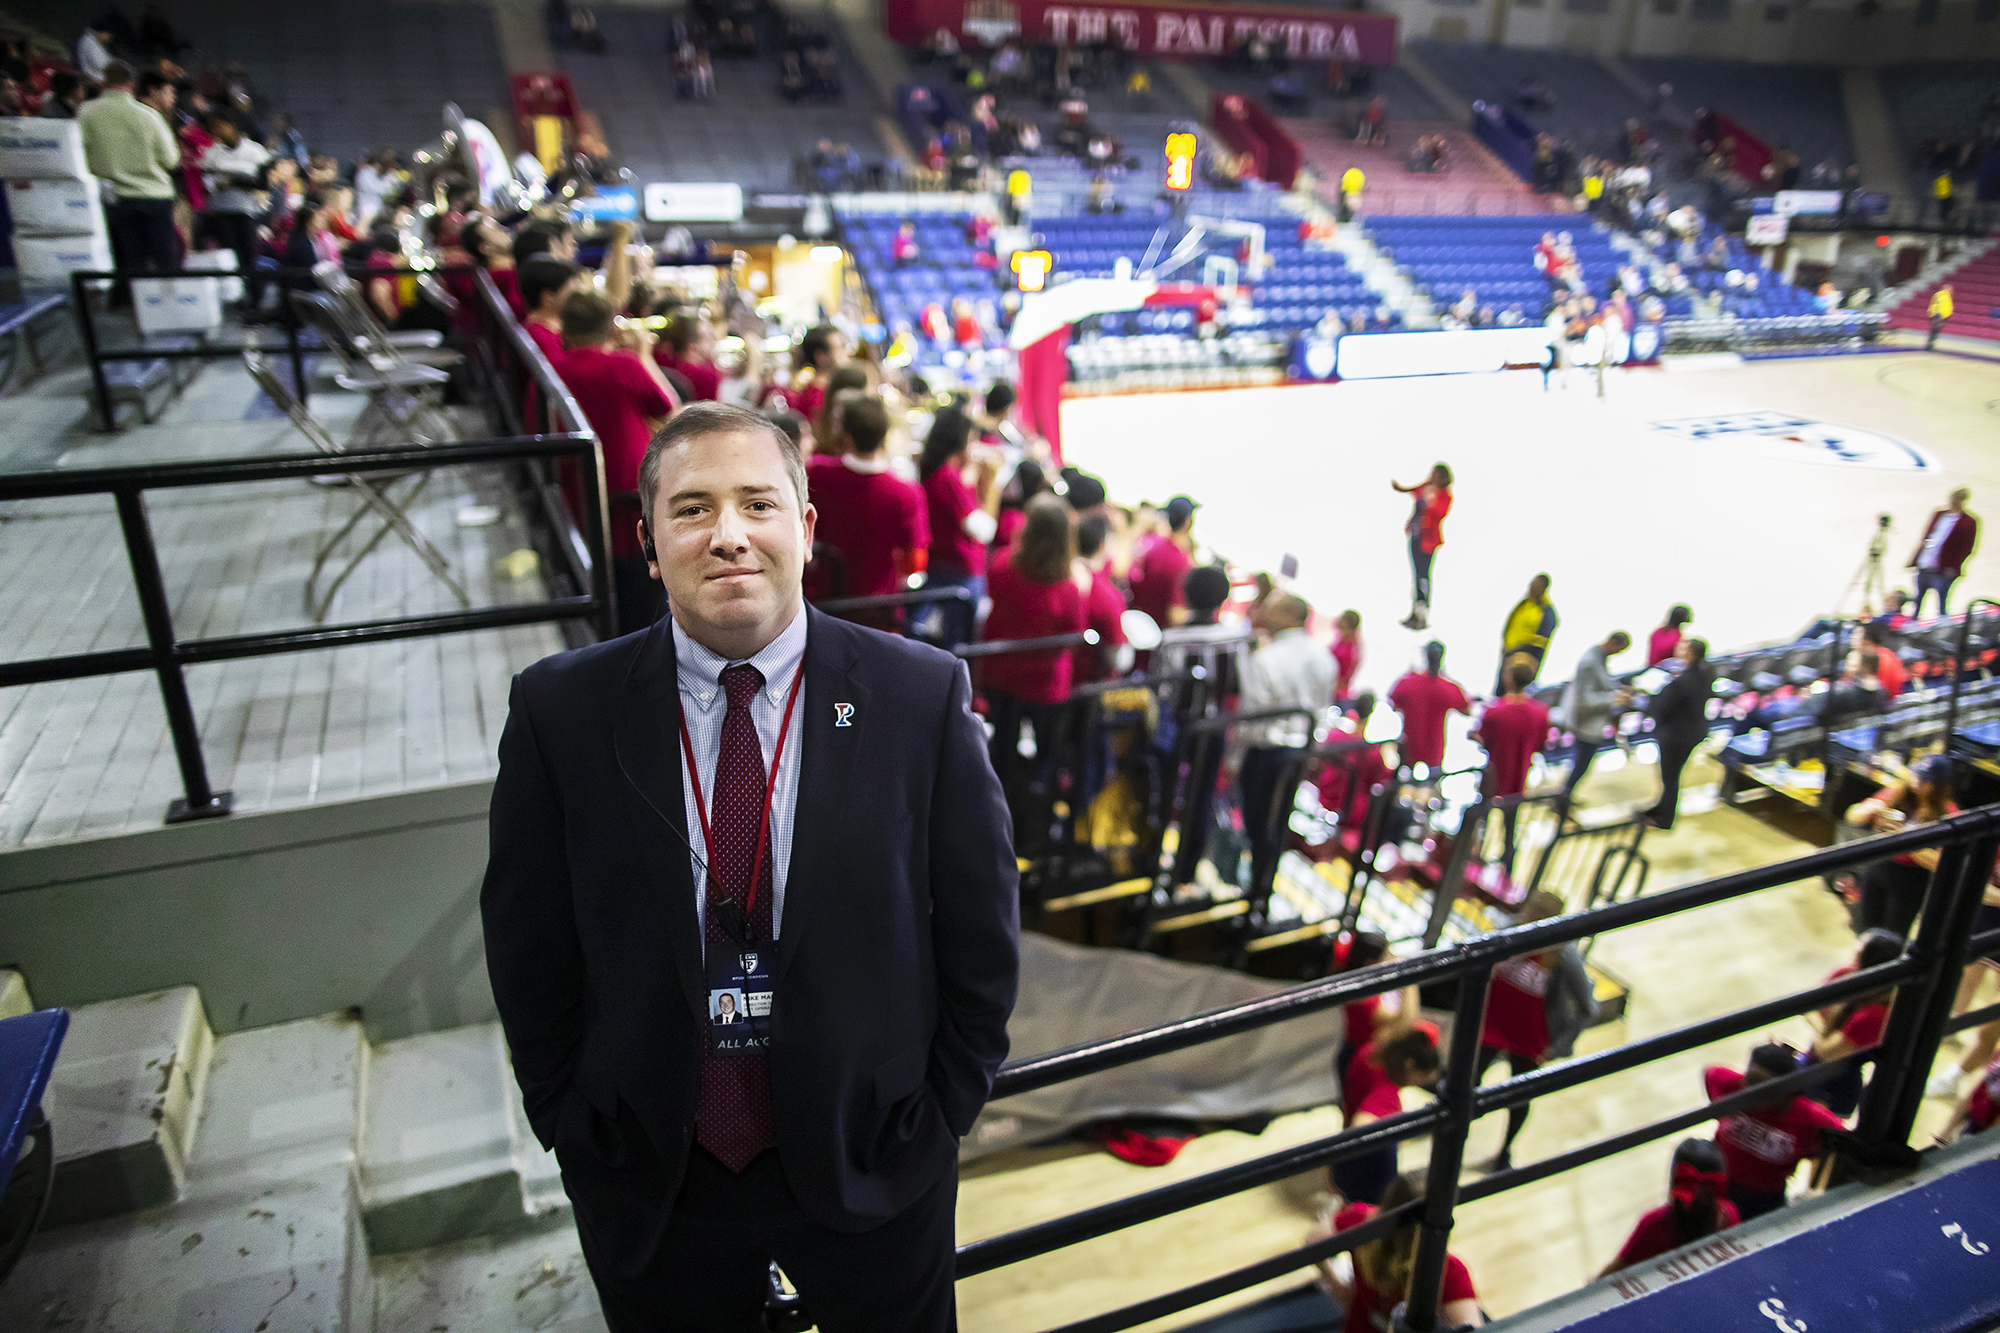 Director of Gameday Operations Mike Martin stands in the bleachers at the Palestra.